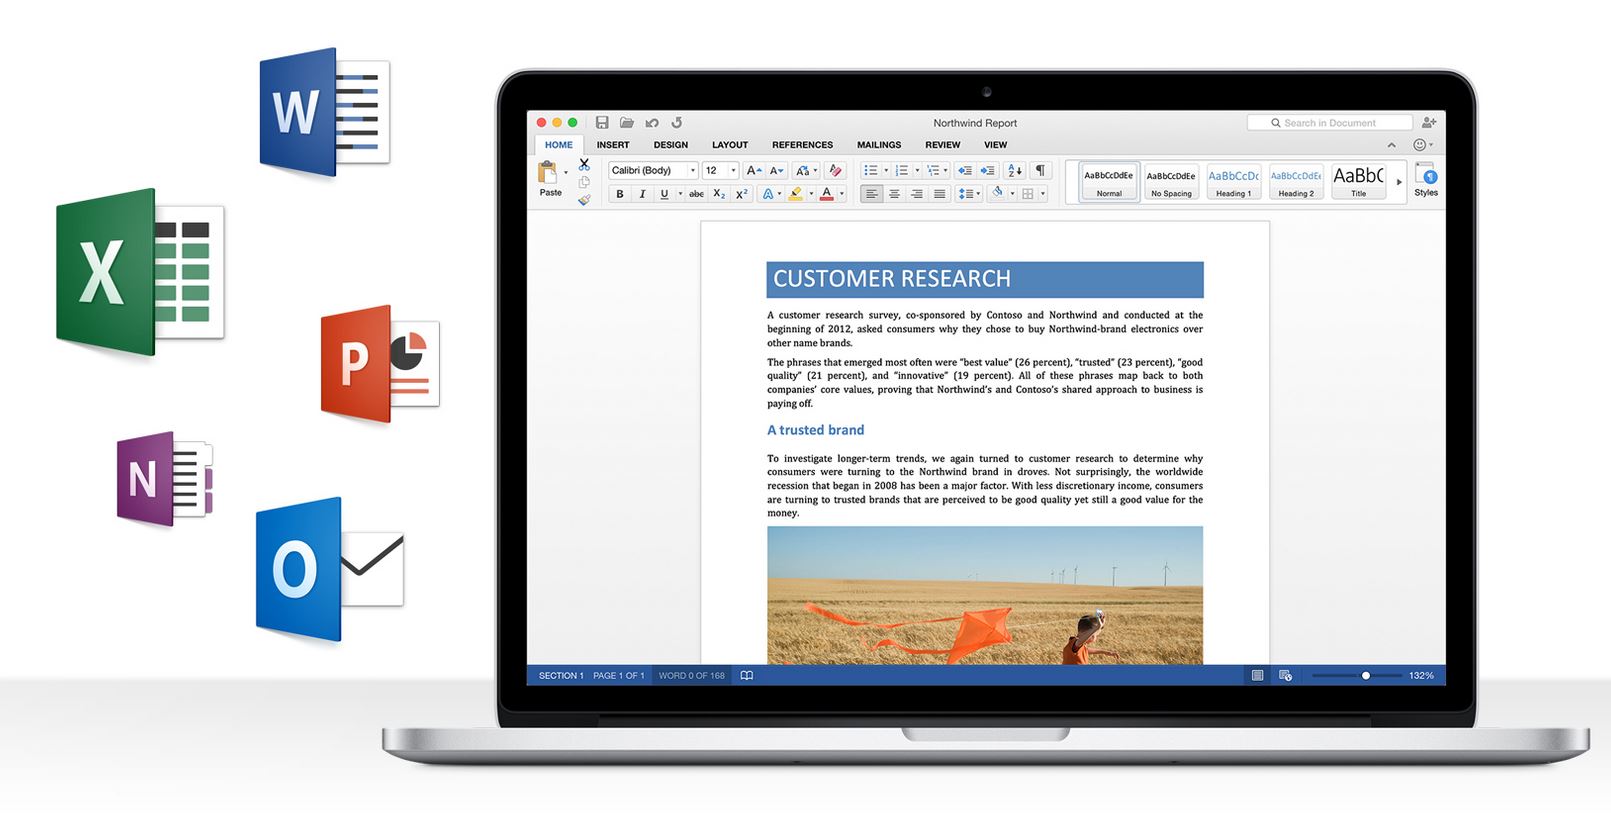 Microsoft releases Office Insider version 16.60 (Build 22032100) for Mac users